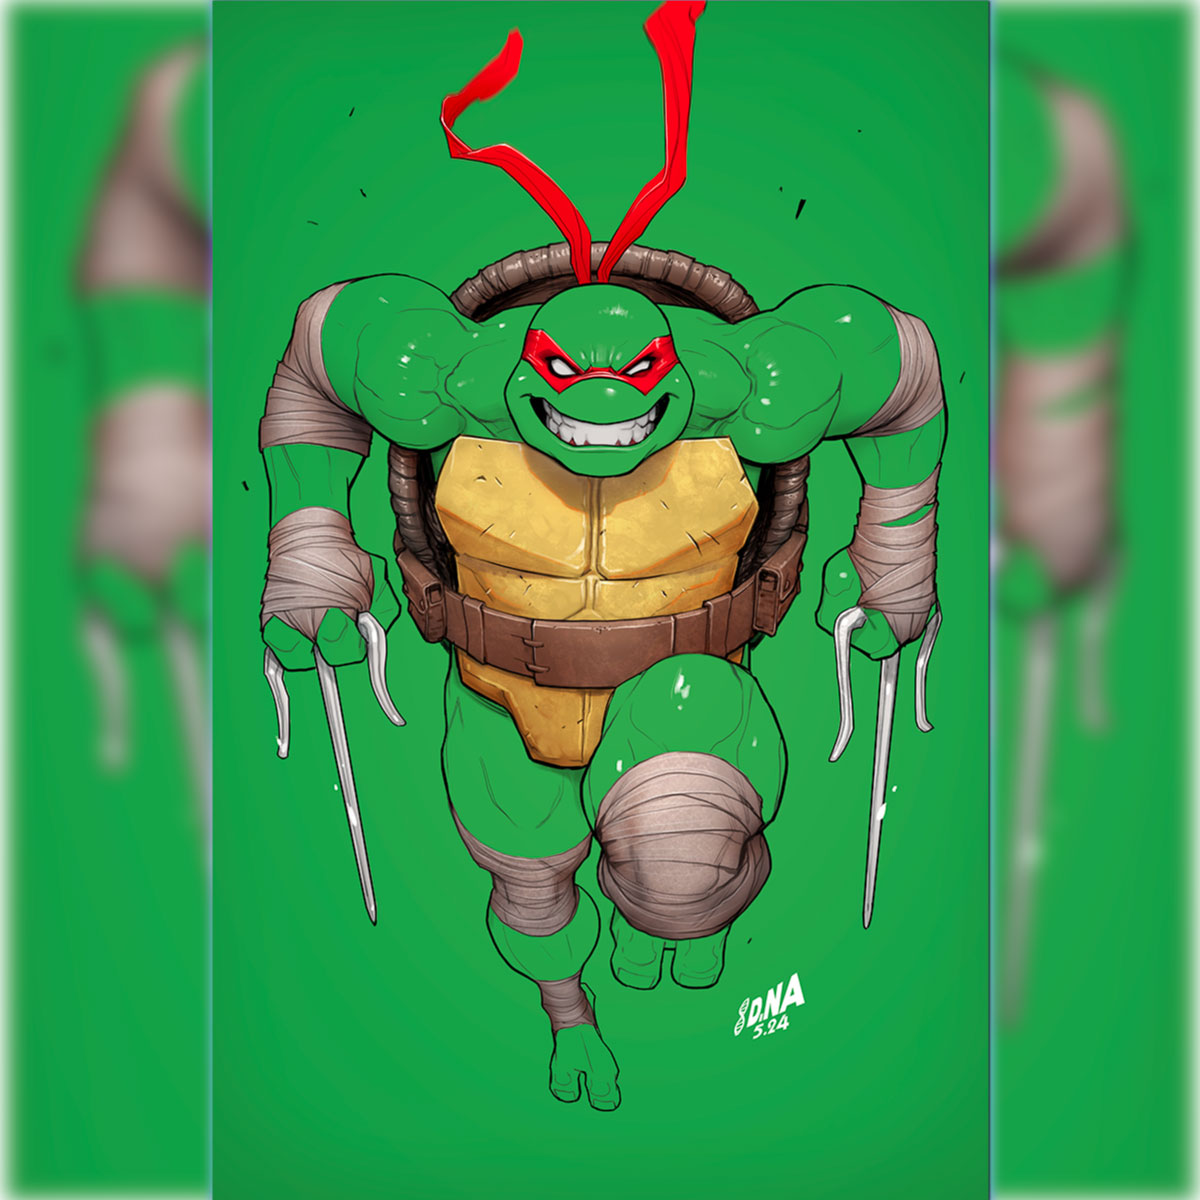 Turtle Power! Pre-orders for the TMNT #1 David Nakayama Exclusive (featuring Raphael in color bleed!) begin 5/17 at 5 PM CST! Don't miss out UnknownComicbooks.com #TMNT #ExclusiveVariant #PreOrderNow #UnknownComics